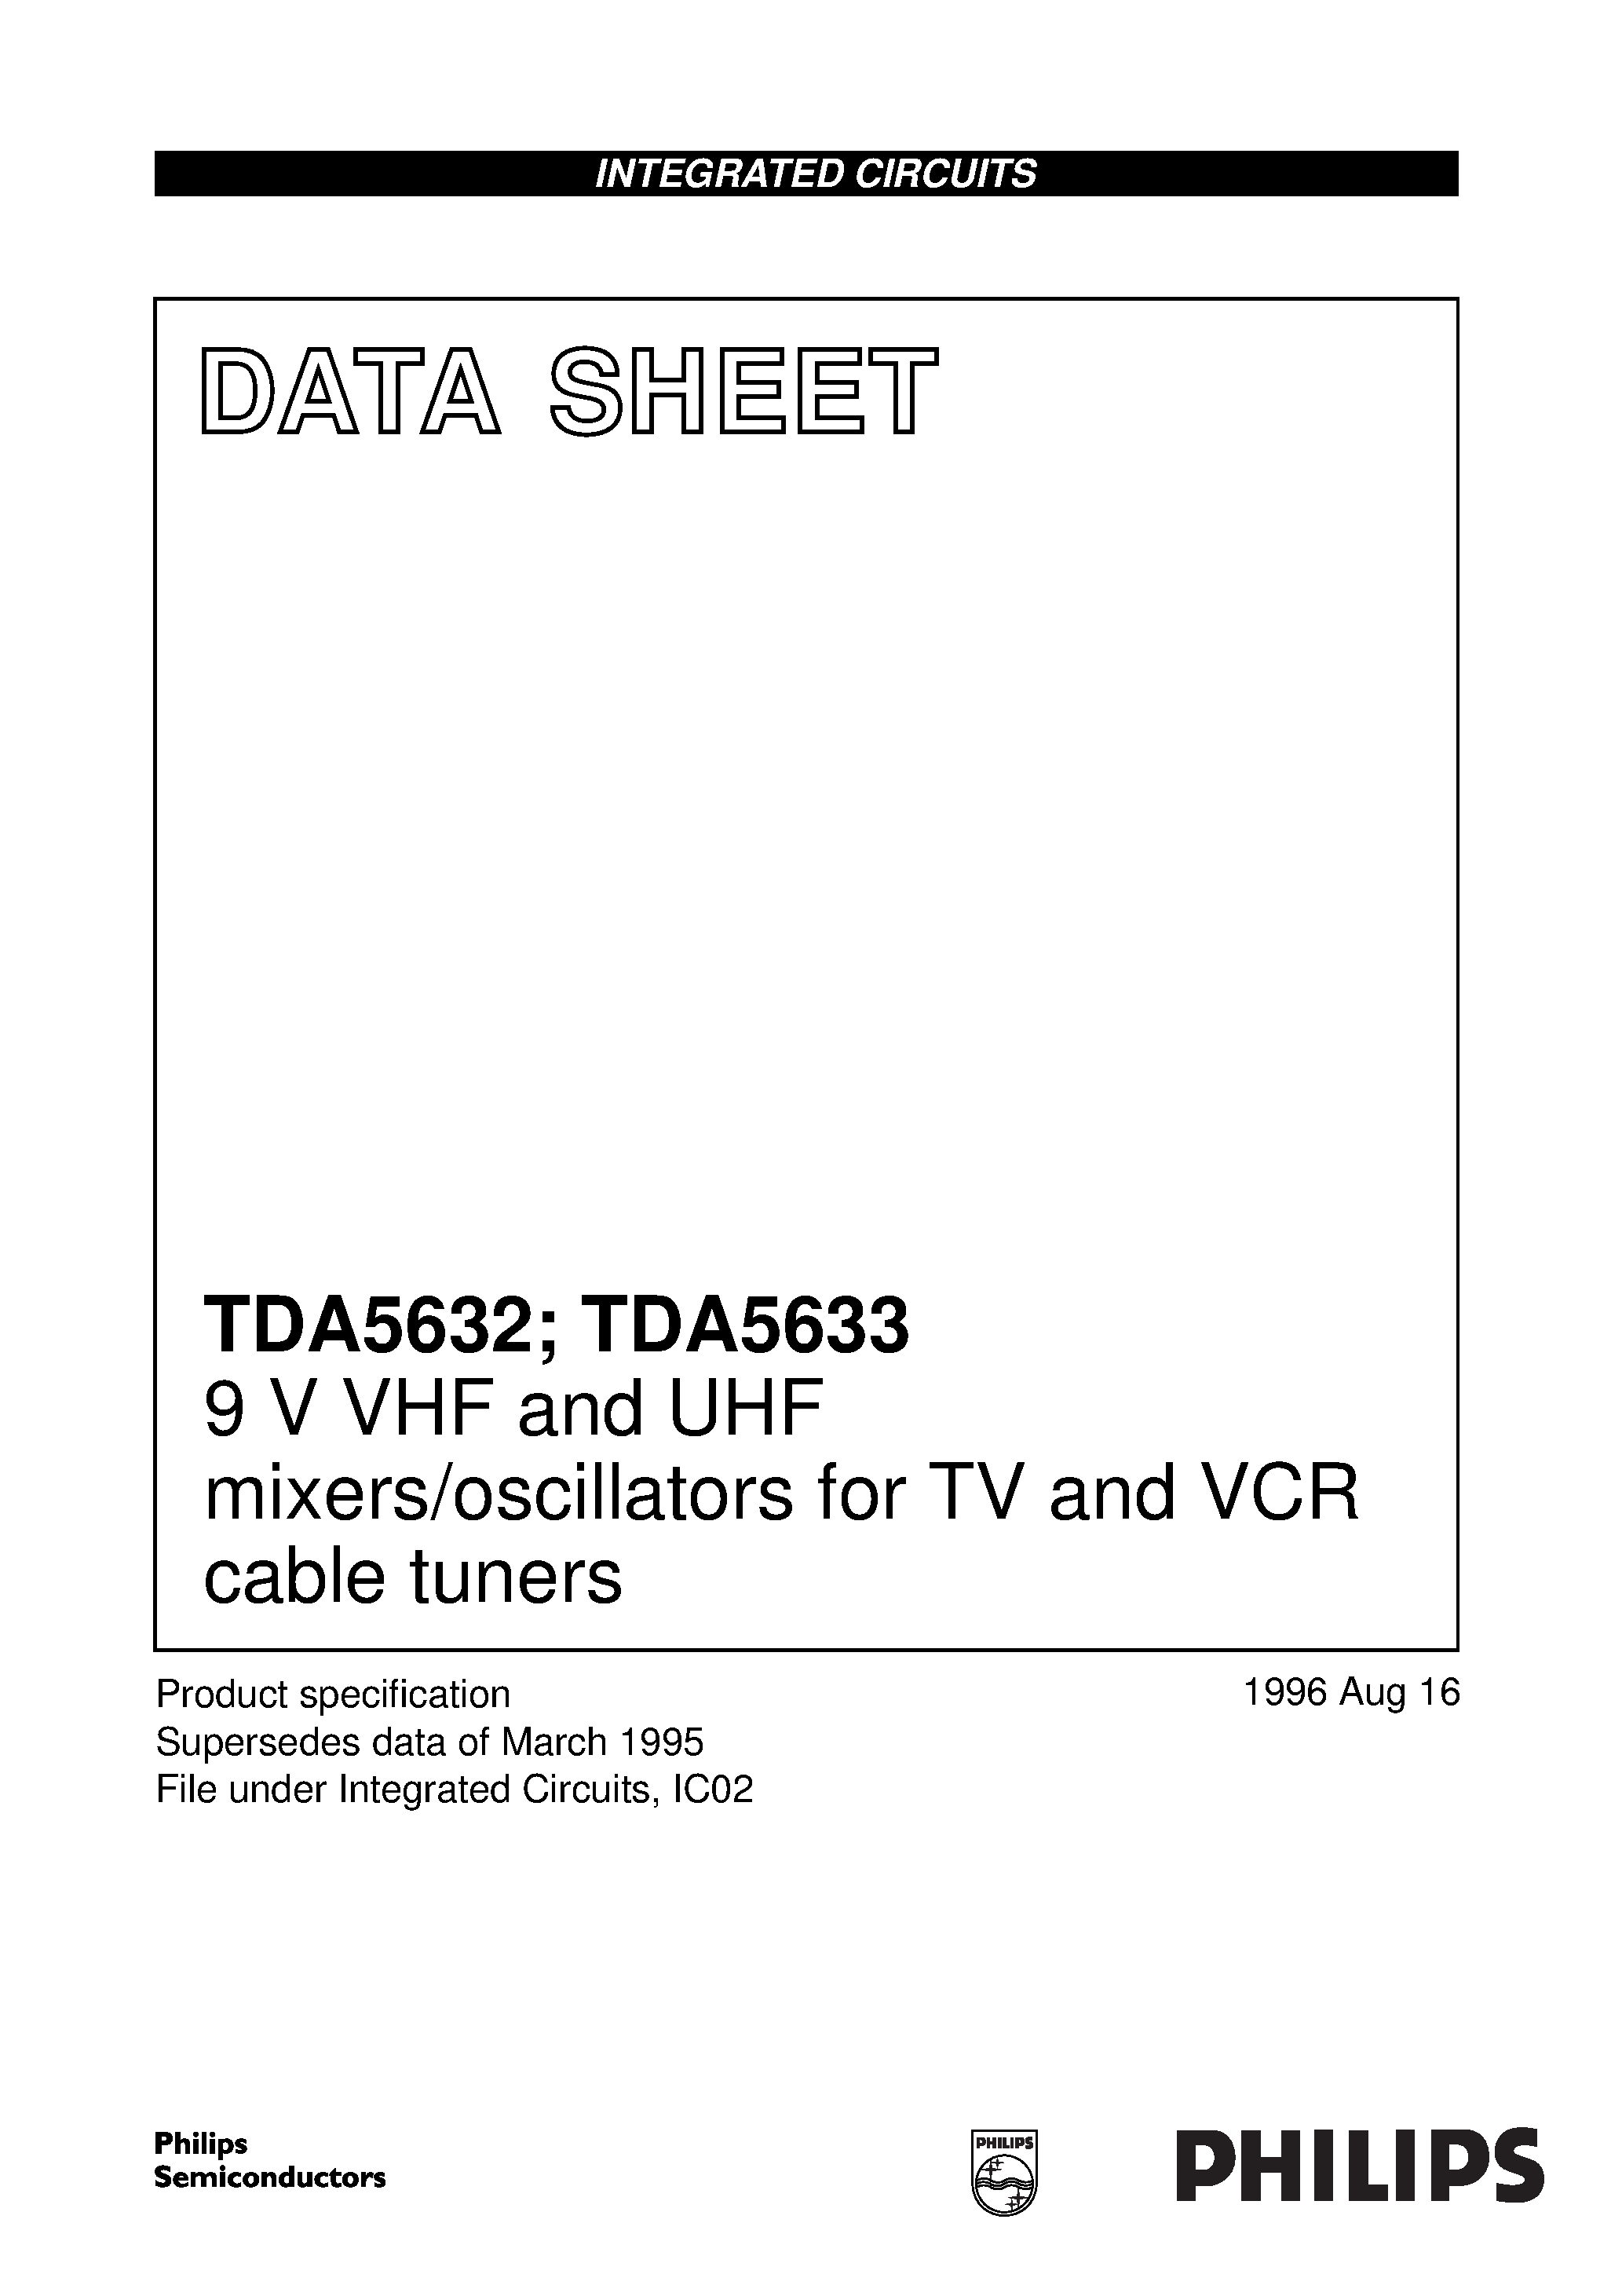 Datasheet TDA5633T - 9 V VHF and UHF mixers/oscillators for TV and VCR cable tuners page 1